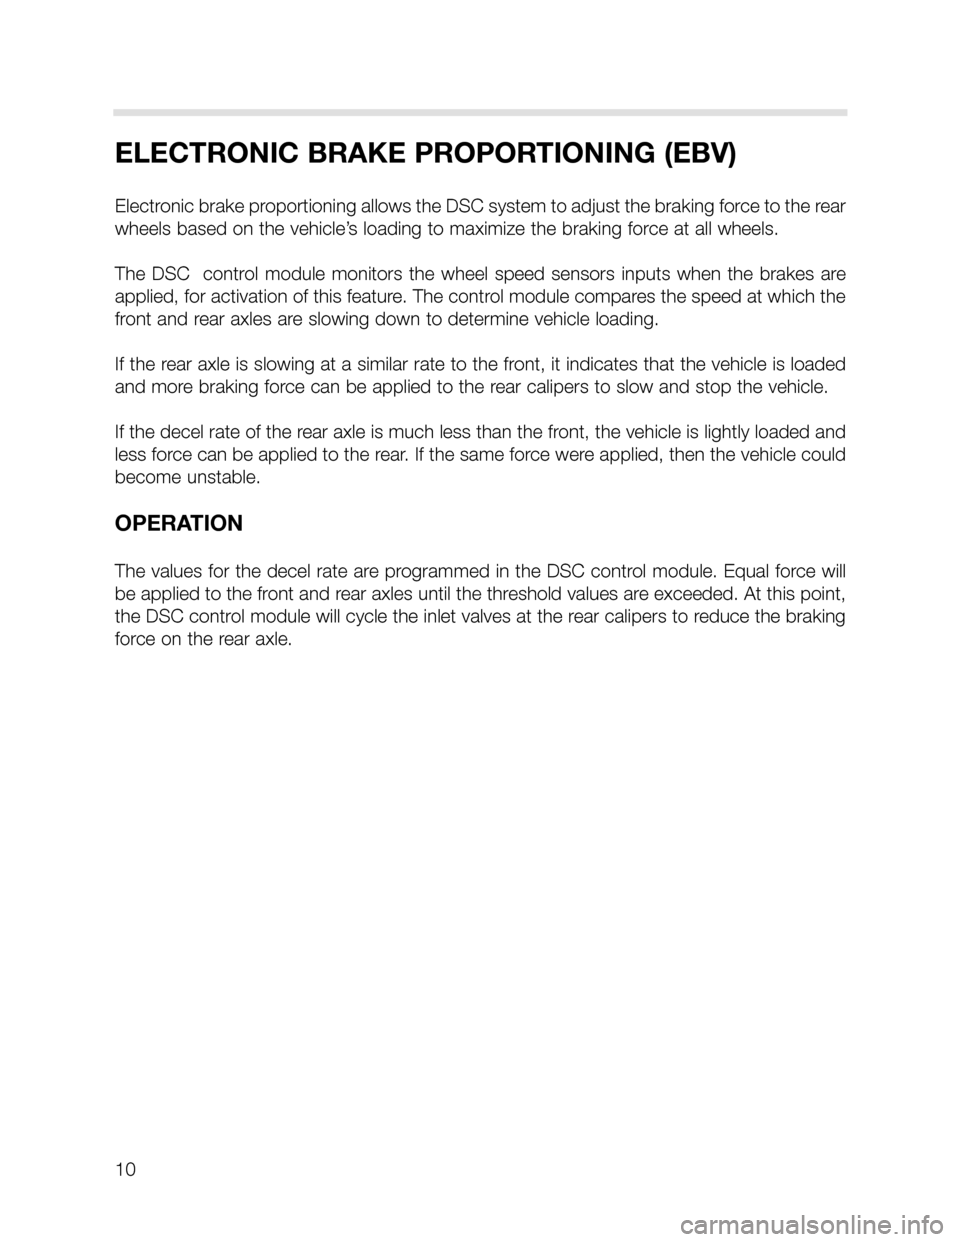 BMW X5 2004 E53 DSC System Workshop Manual 10
ELECTRONIC BRAKE PROPORTIONING (EBV)
Electronic brake proportioning allows the DSC system to adjust the braking force to the rear
wheels based on the vehicle’s loading to maximize the braking for